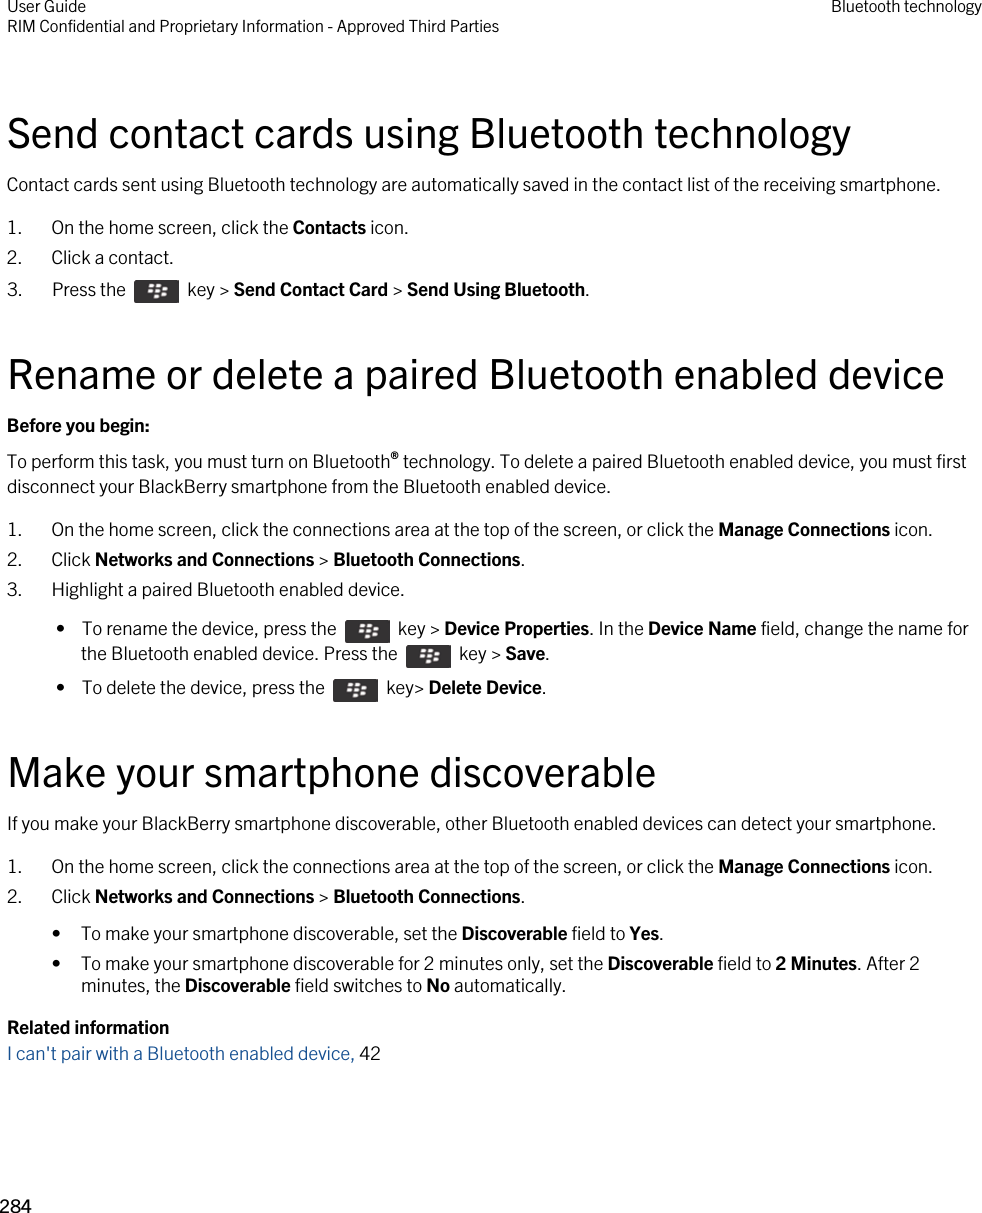 Send contact cards using Bluetooth technologyContact cards sent using Bluetooth technology are automatically saved in the contact list of the receiving smartphone.1. On the home screen, click the Contacts icon.2. Click a contact.3.  Press the    key &gt; Send Contact Card &gt; Send Using Bluetooth. Rename or delete a paired Bluetooth enabled deviceBefore you begin: To perform this task, you must turn on Bluetooth® technology. To delete a paired Bluetooth enabled device, you must first disconnect your BlackBerry smartphone from the Bluetooth enabled device.1. On the home screen, click the connections area at the top of the screen, or click the Manage Connections icon.2. Click Networks and Connections &gt; Bluetooth Connections.3. Highlight a paired Bluetooth enabled device. •  To rename the device, press the    key &gt; Device Properties. In the Device Name field, change the name for the Bluetooth enabled device. Press the    key &gt; Save. •  To delete the device, press the    key&gt; Delete Device.Make your smartphone discoverableIf you make your BlackBerry smartphone discoverable, other Bluetooth enabled devices can detect your smartphone.1. On the home screen, click the connections area at the top of the screen, or click the Manage Connections icon.2. Click Networks and Connections &gt; Bluetooth Connections.• To make your smartphone discoverable, set the Discoverable field to Yes.• To make your smartphone discoverable for 2 minutes only, set the Discoverable field to 2 Minutes. After 2 minutes, the Discoverable field switches to No automatically.Related informationI can&apos;t pair with a Bluetooth enabled device, 42 User GuideRIM Confidential and Proprietary Information - Approved Third Parties Bluetooth technology284 